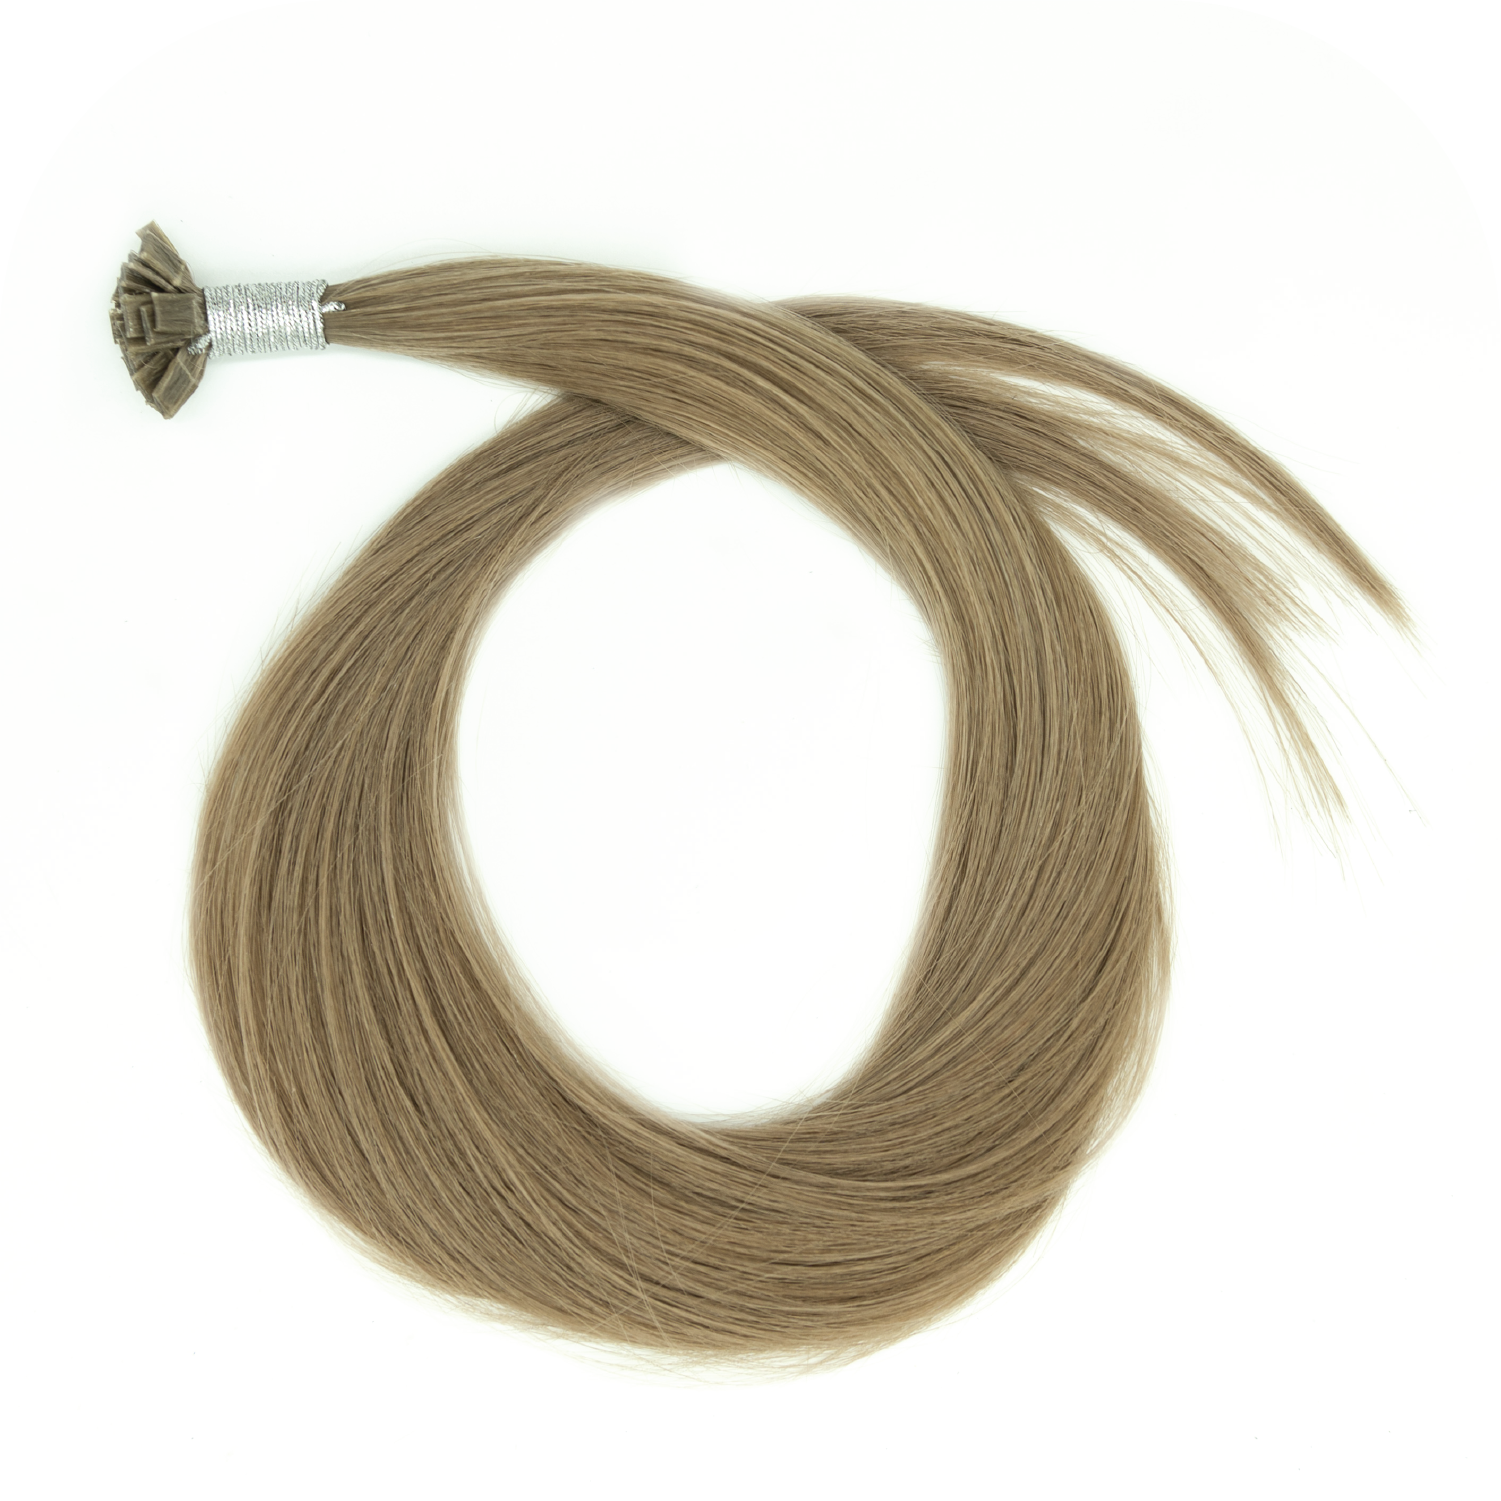 Couture Hair Co. Couture Tip or K Tip Hair Extension in Color Dark Blond 